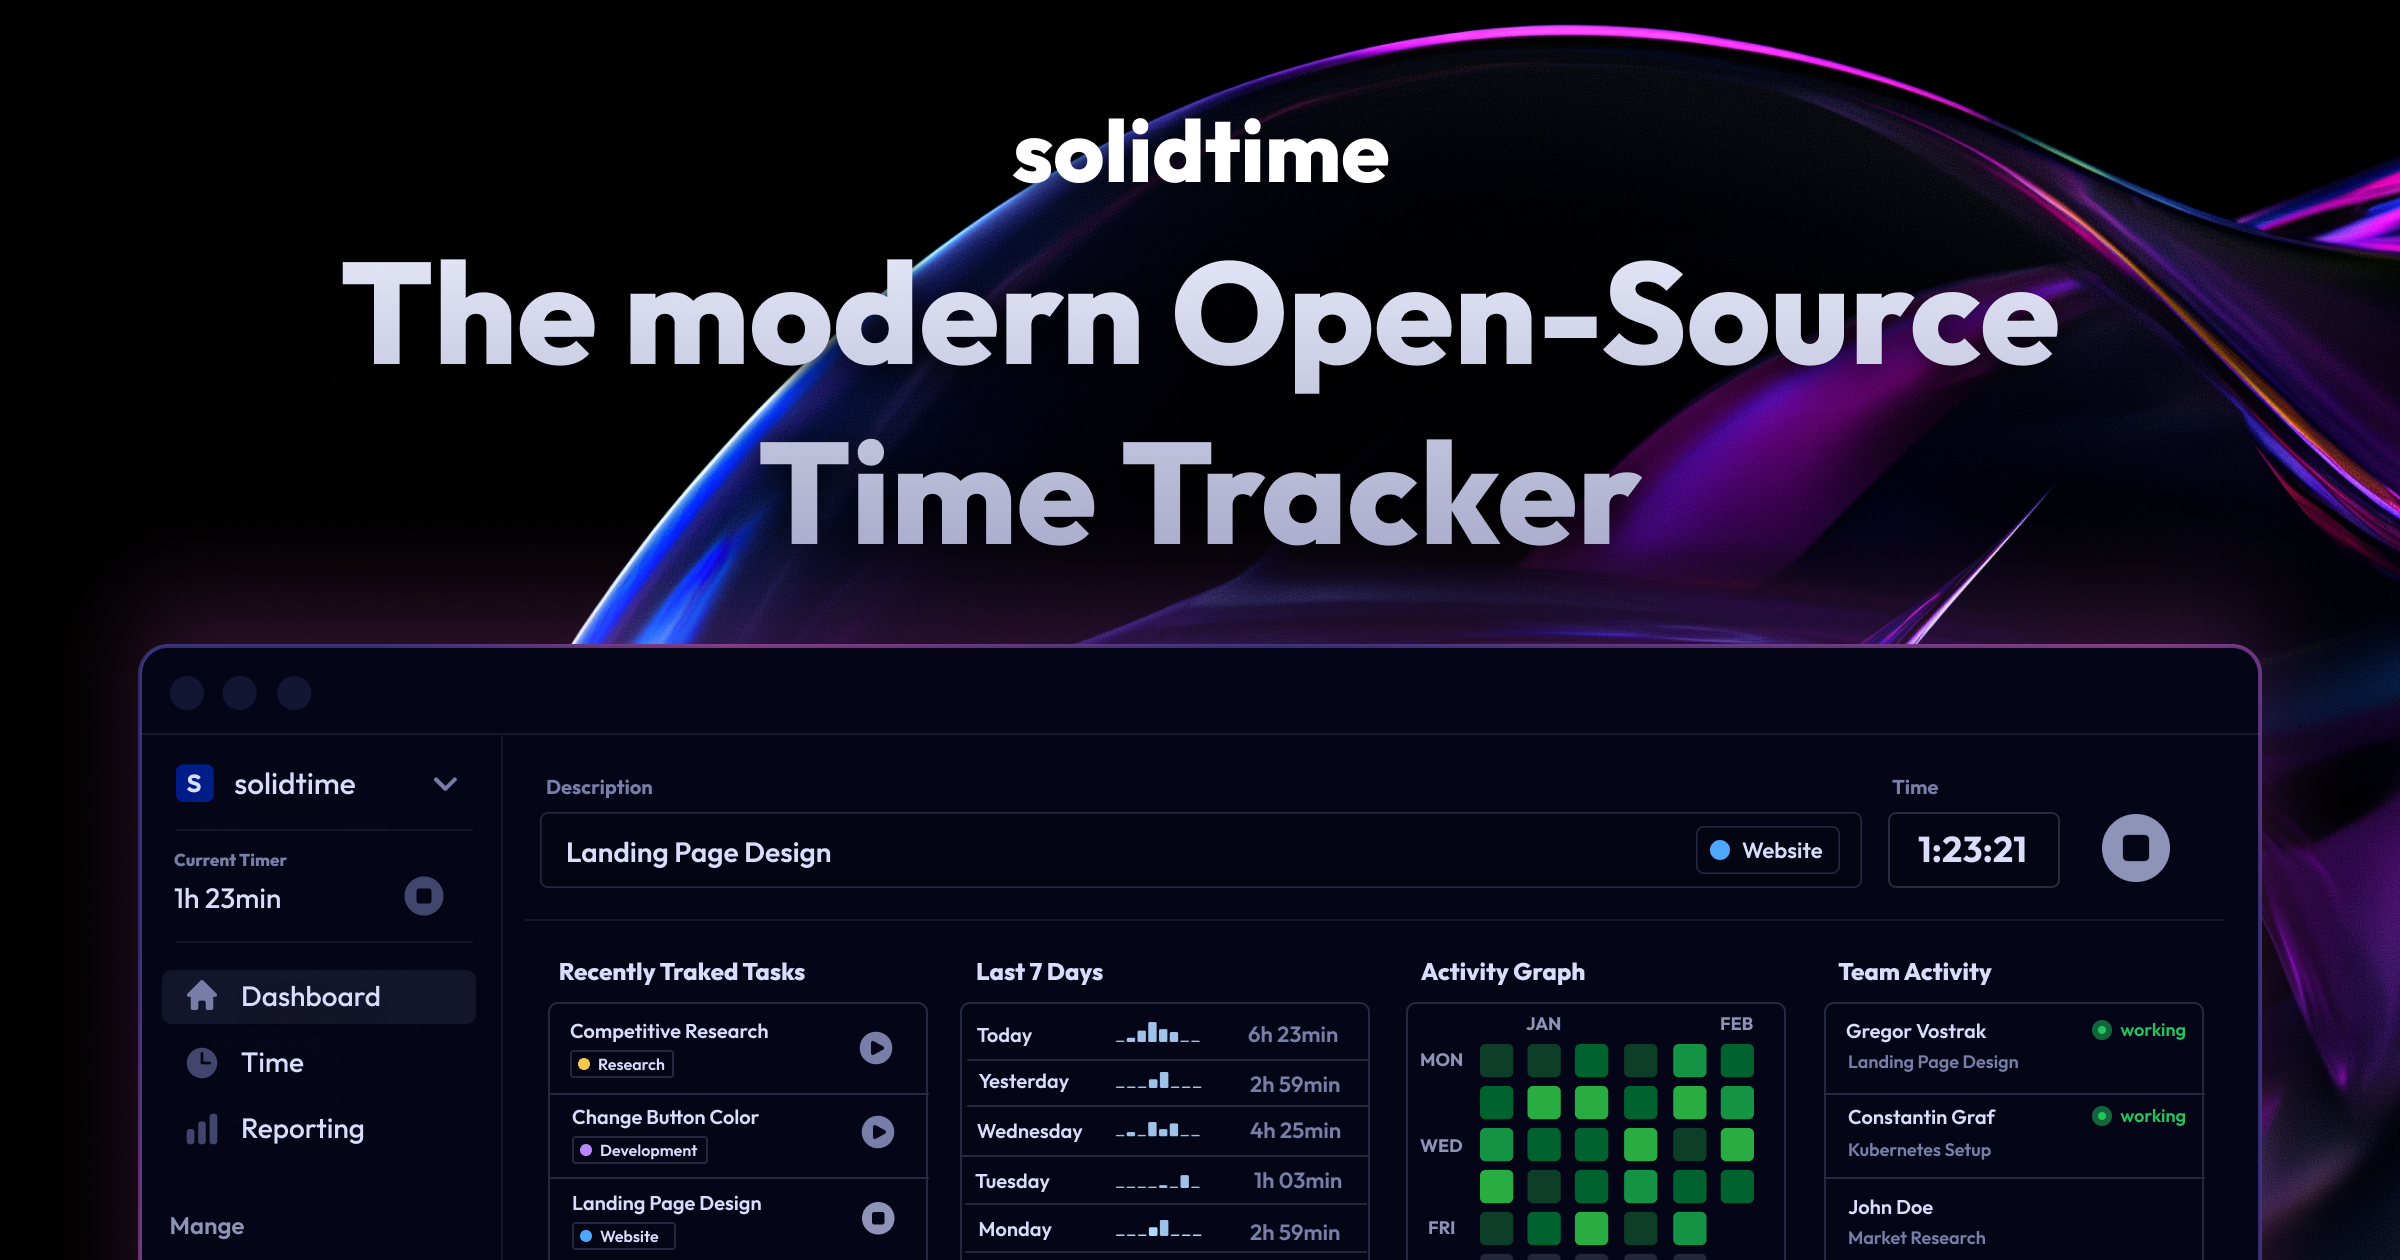 Screenshot of the solidtime application with header: solidtime - The modern Open-Source Time Tracker